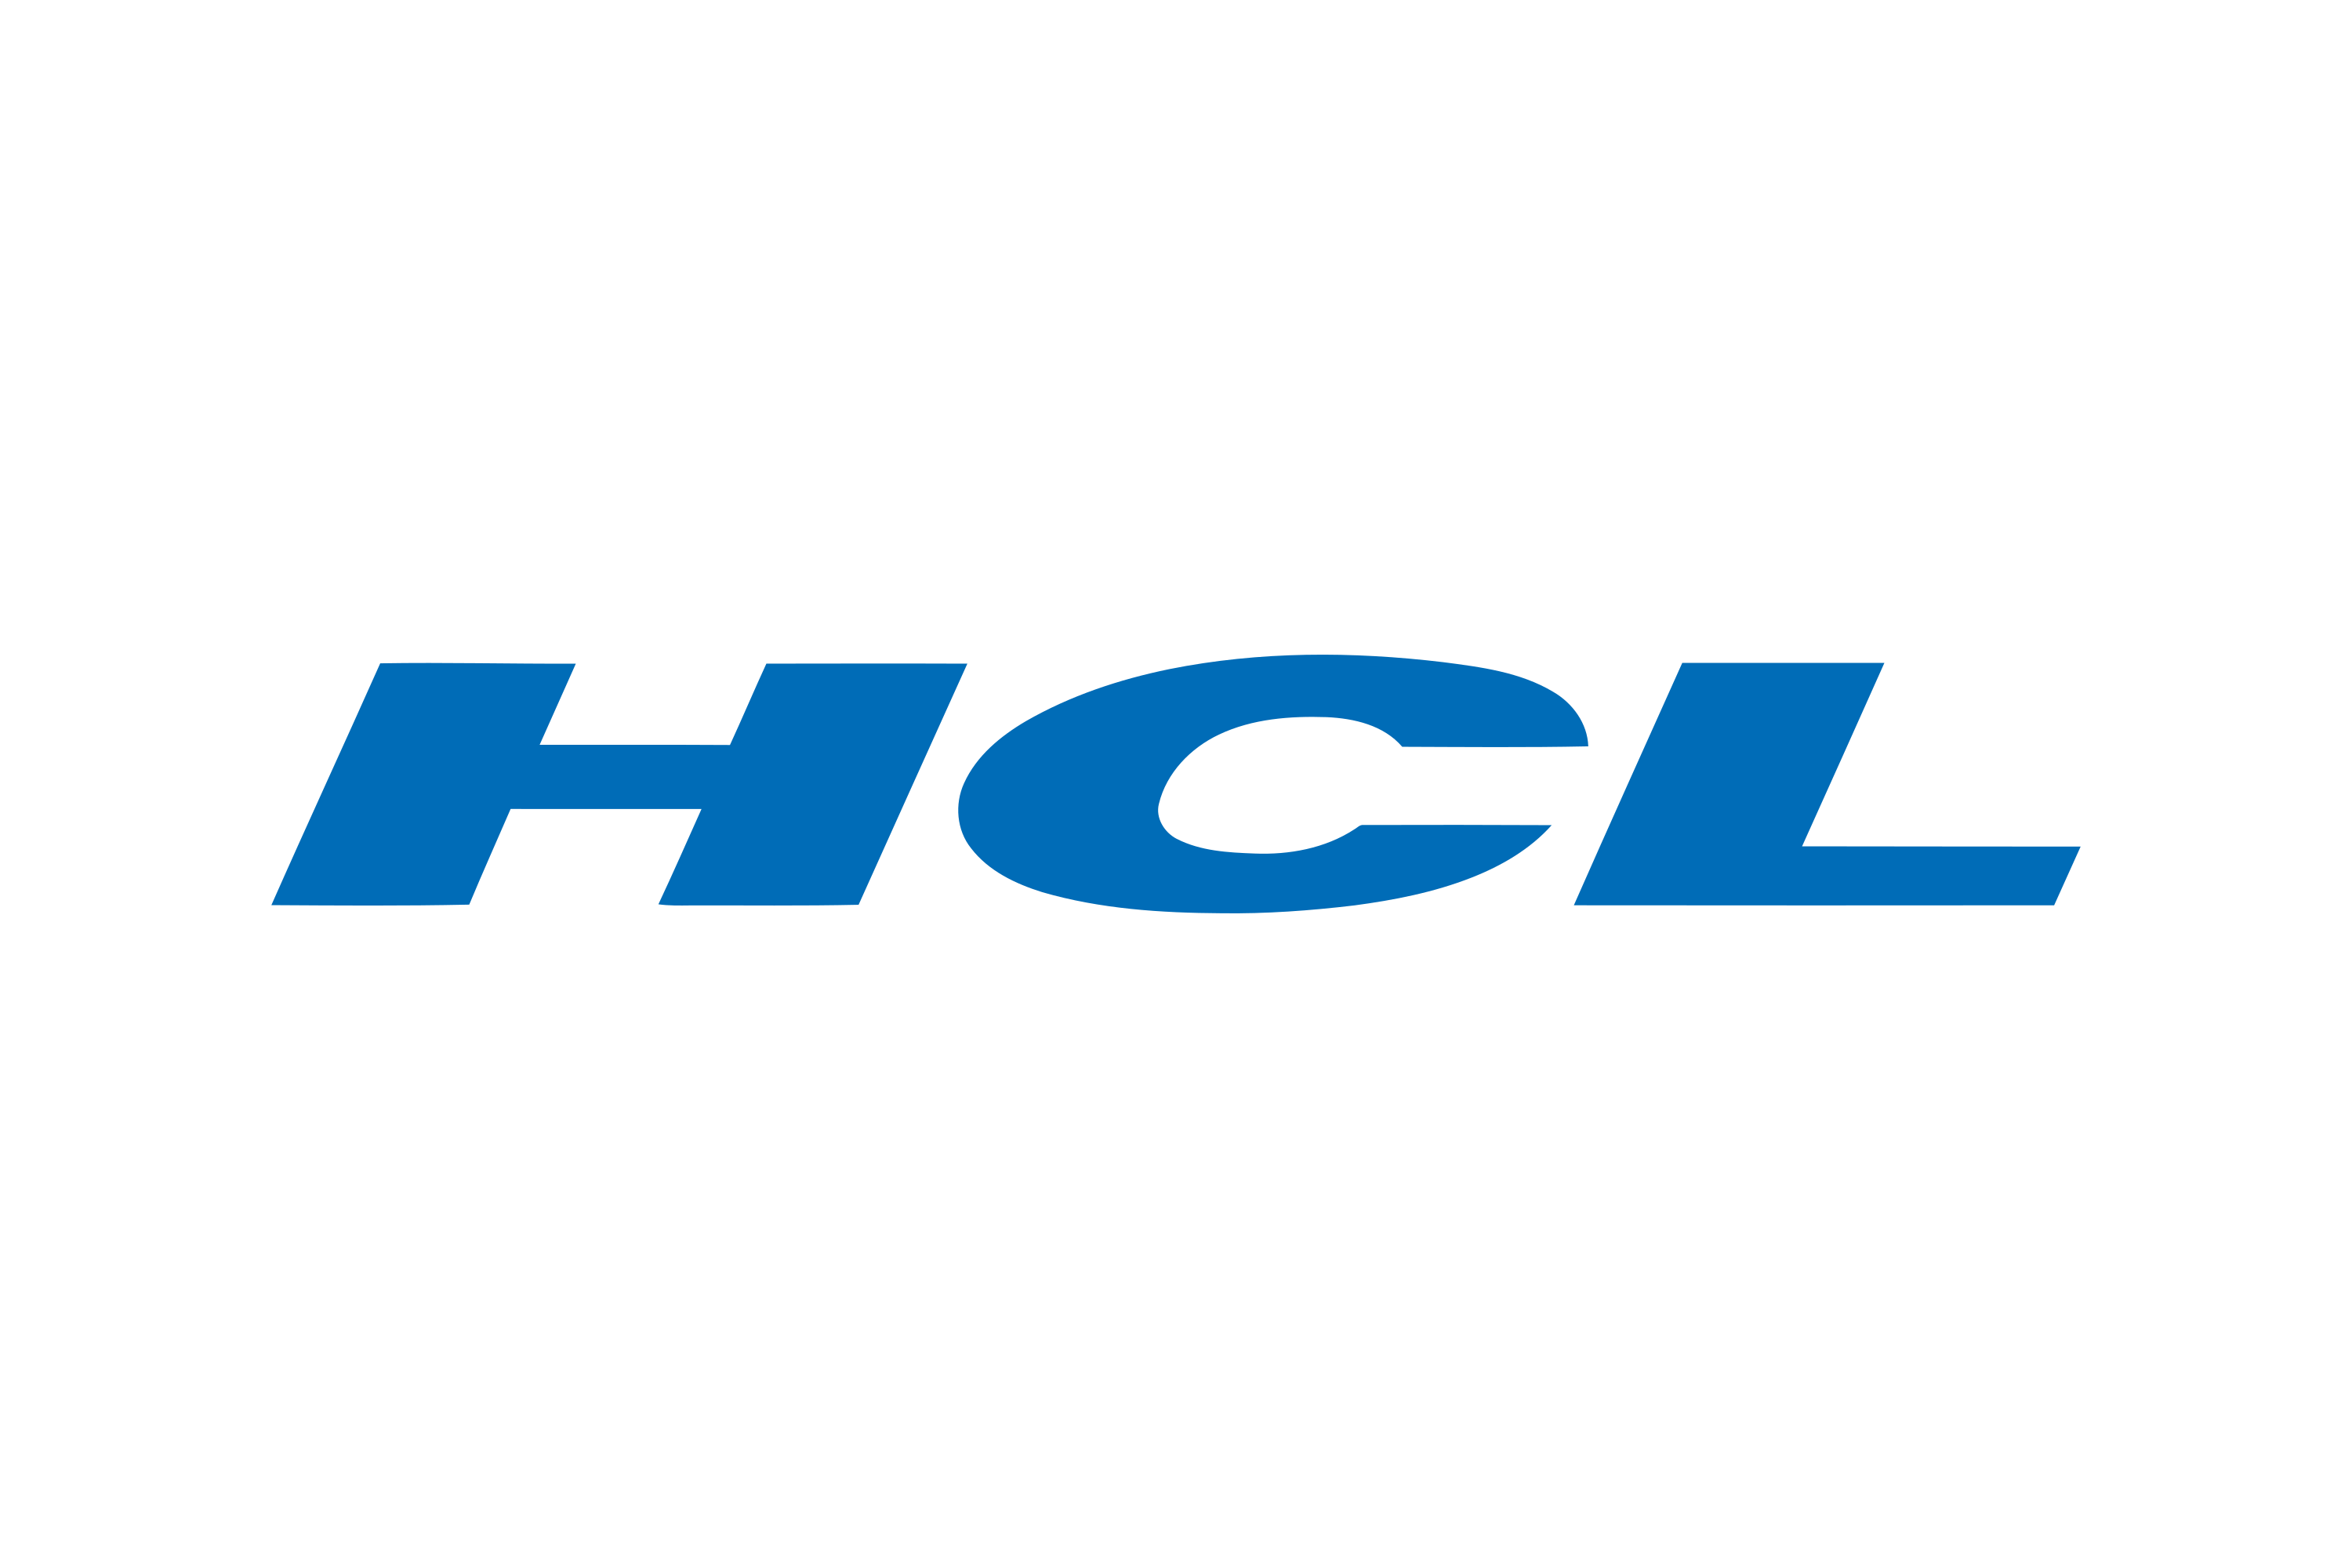 HCL Technologies Stocks Live Updates: HCL Technologies  Closes at Rs 1343.05 with 6-Month Beta of 0.51 